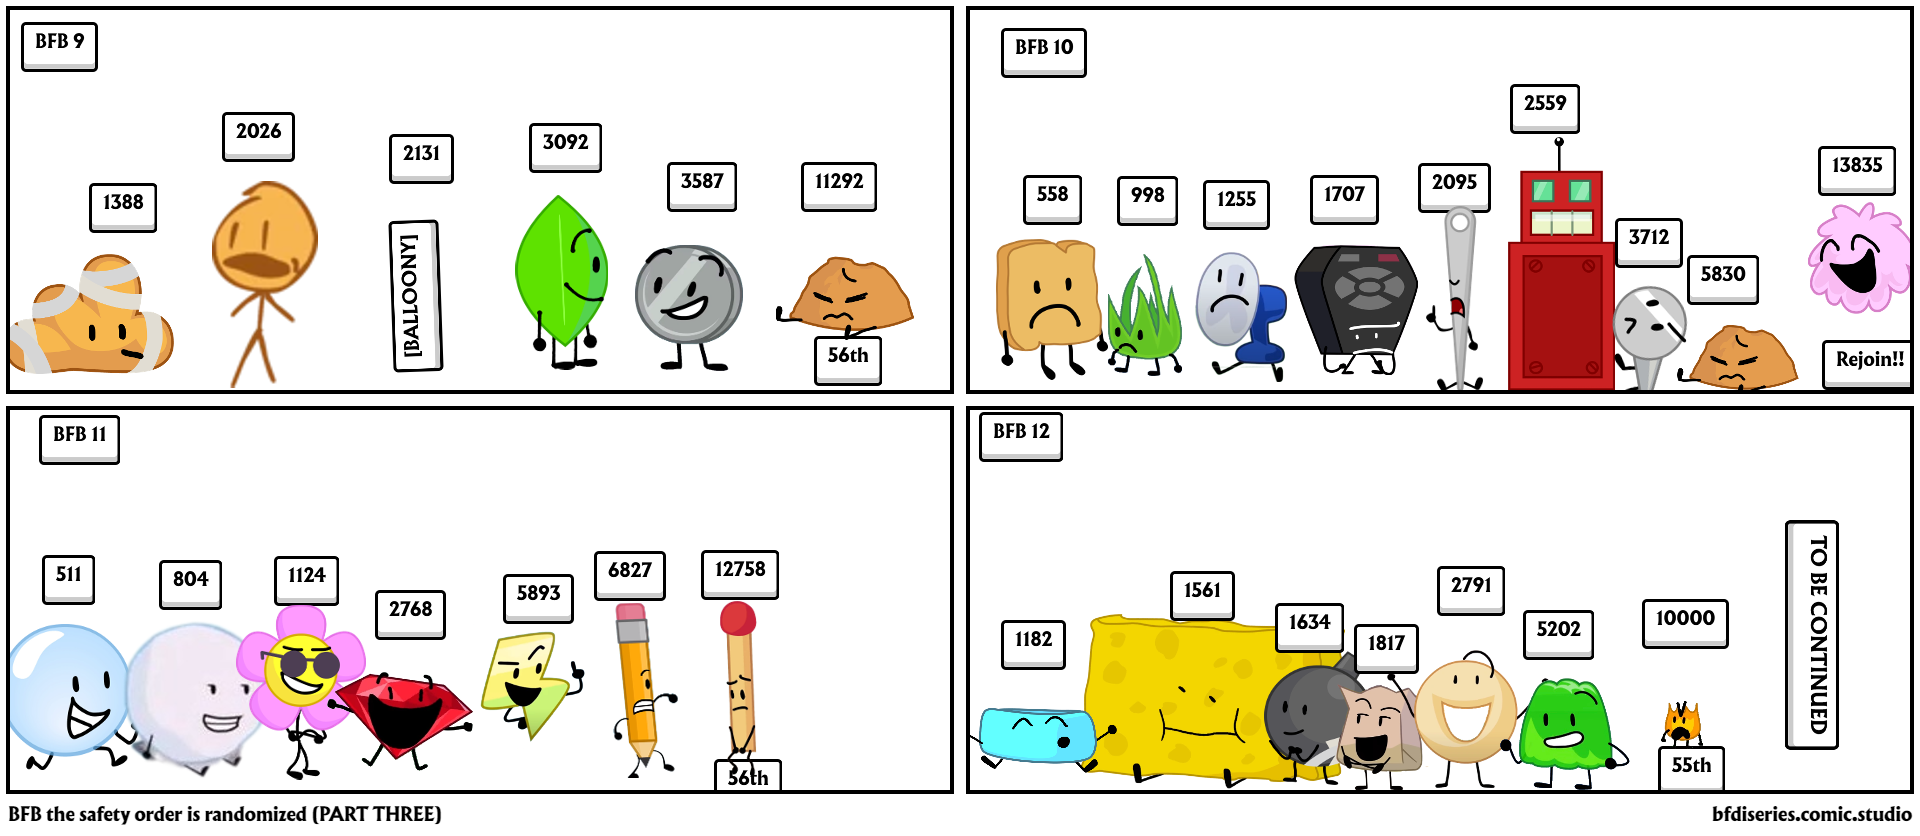 BFB the safety order is randomized (PART THREE)